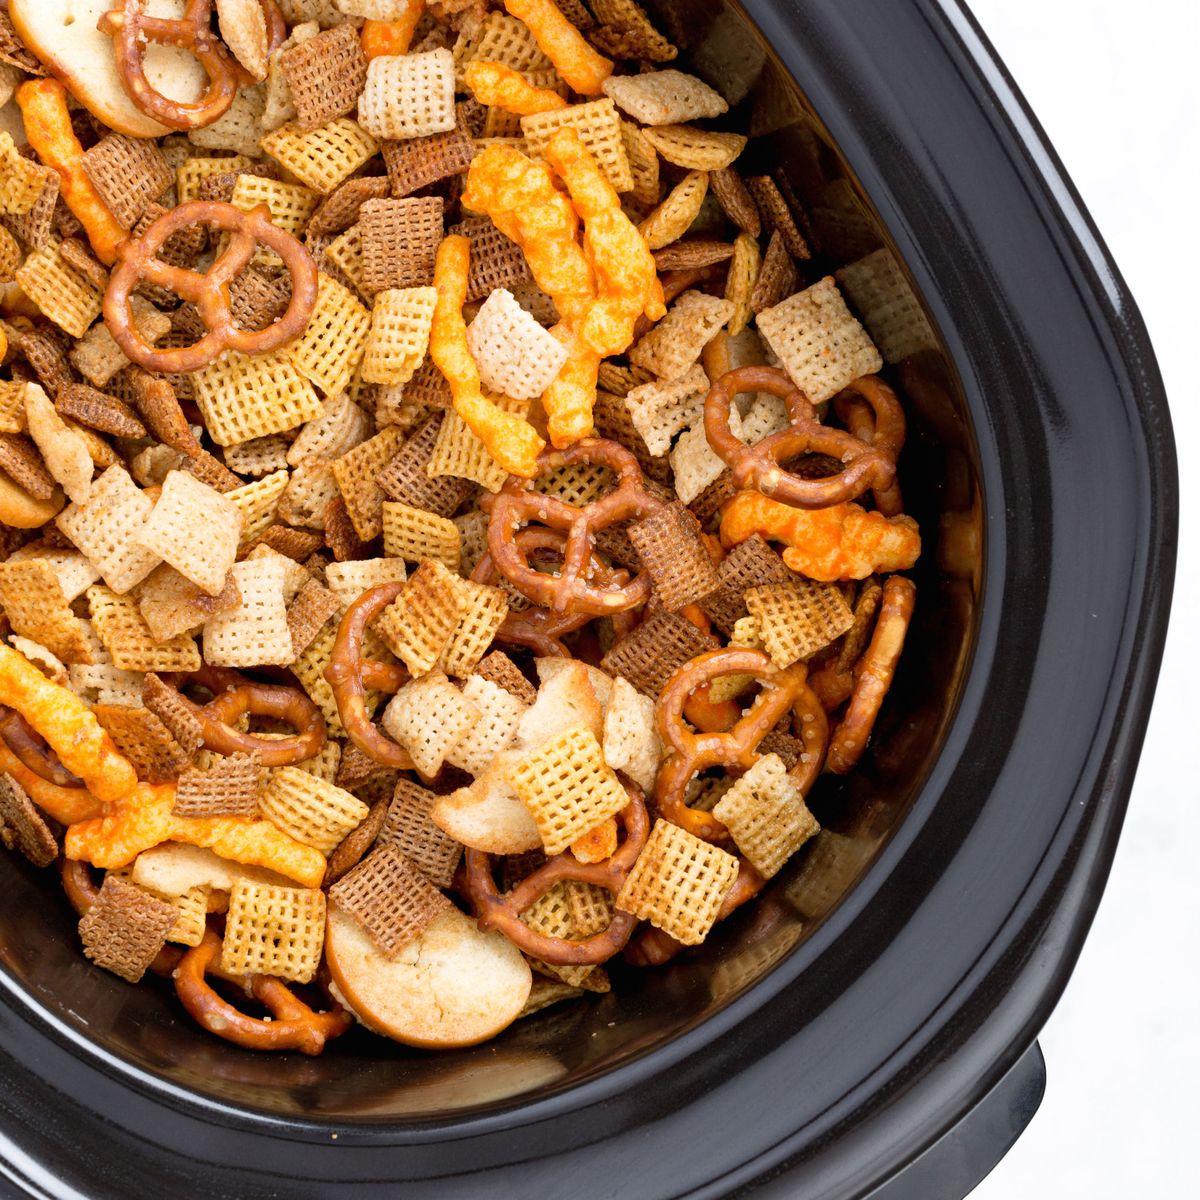 https://hips.hearstapps.com/del.h-cdn.co/assets/15/42/2048x2048/square-1445021970-delish-slow-cooker-chex-mix-3.jpg?resize=1200:*